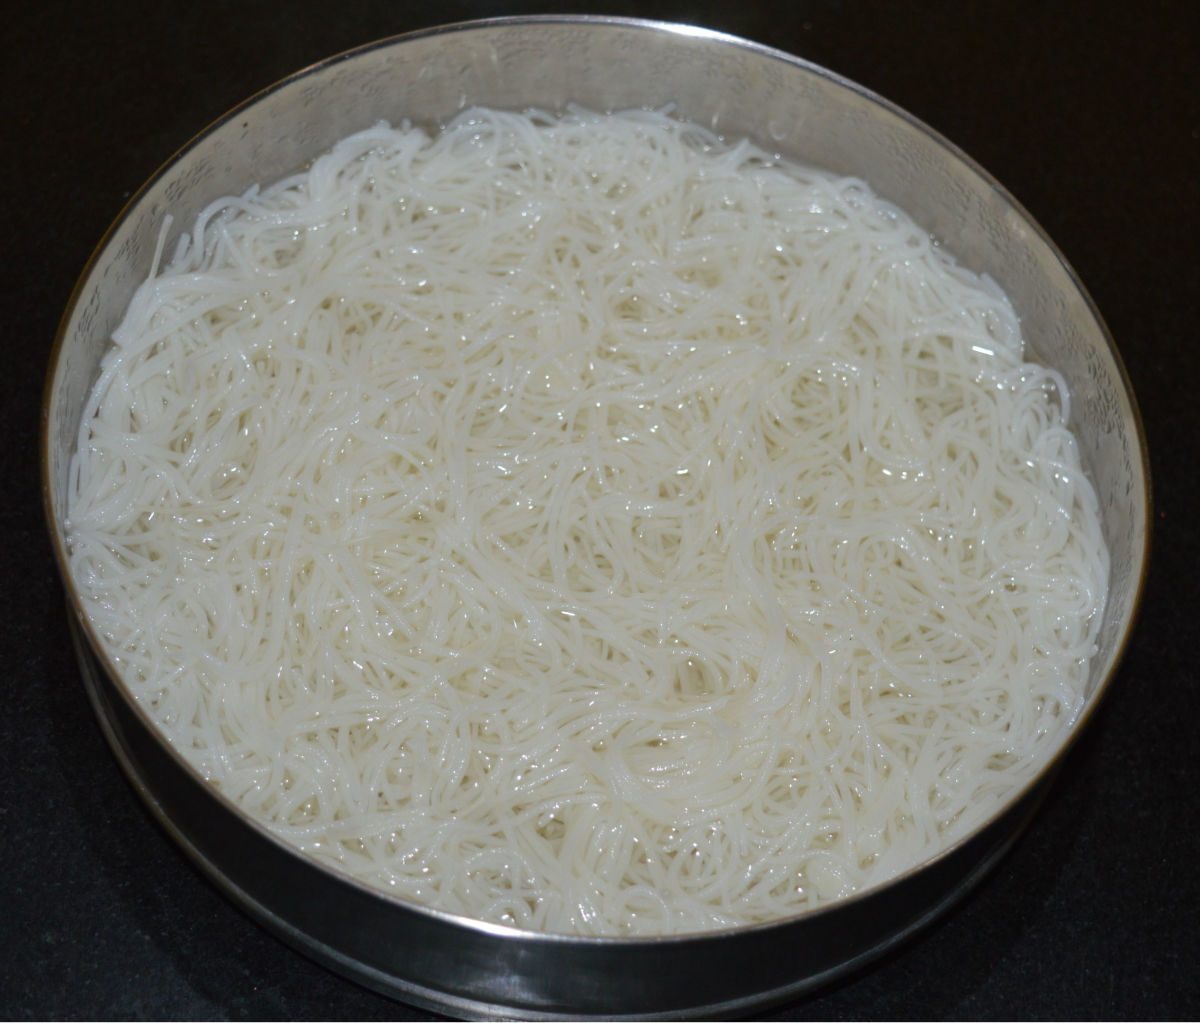 Step one: Pour boiling water on the rice vermicelli. Cover it for 4 minutes. Strain the water. Spread vermicelli on a plate.